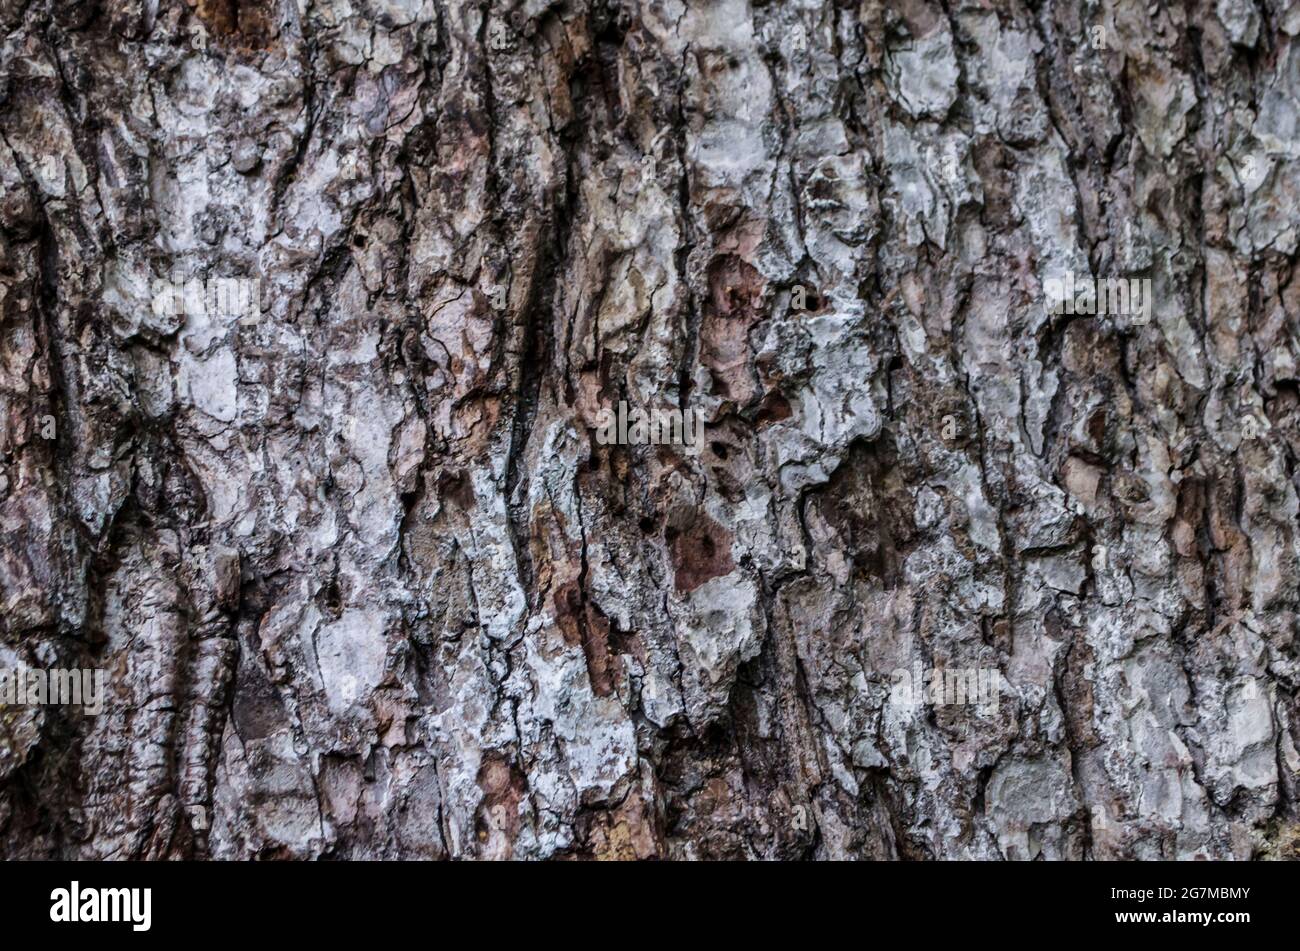 Yoni texture element on a tree trunk. Bark natural photo. Stock Photo